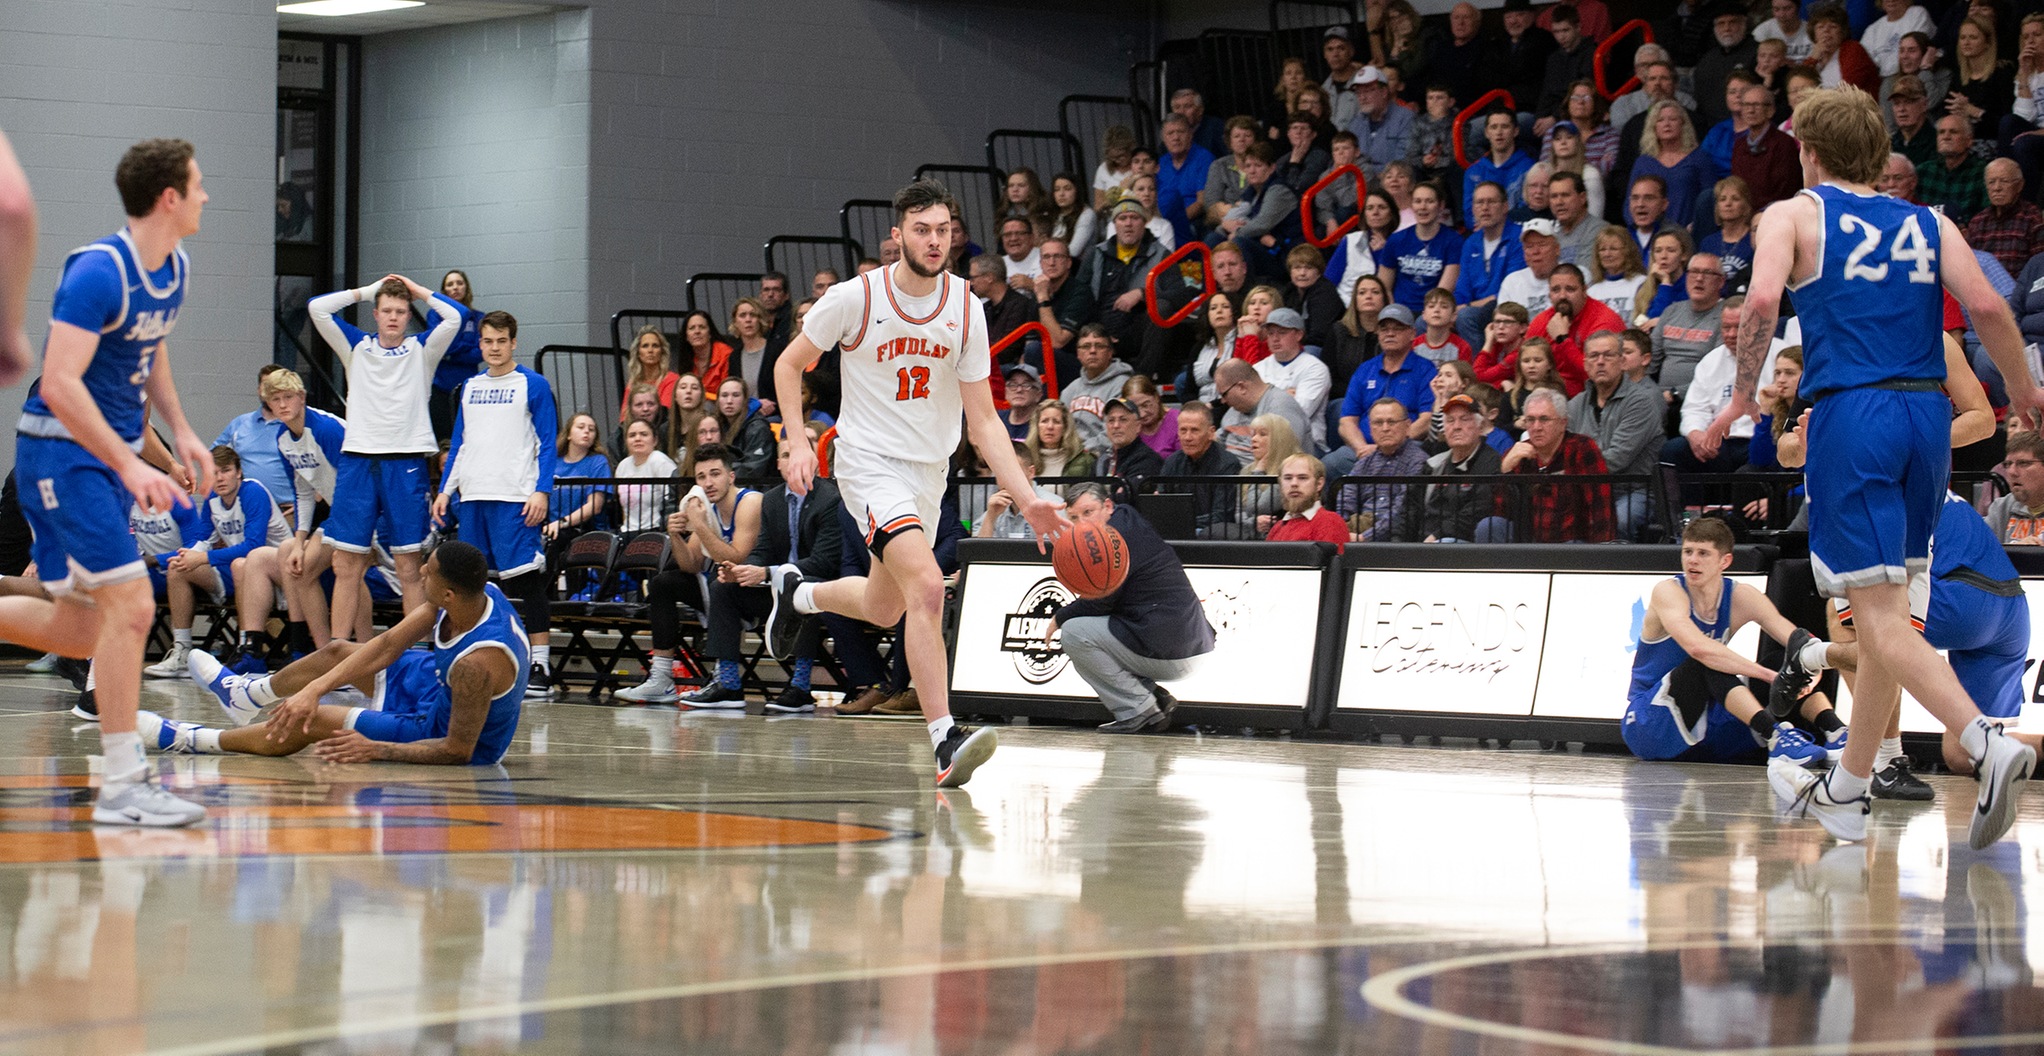 Oilers Fall 59-54 to Hillsdale